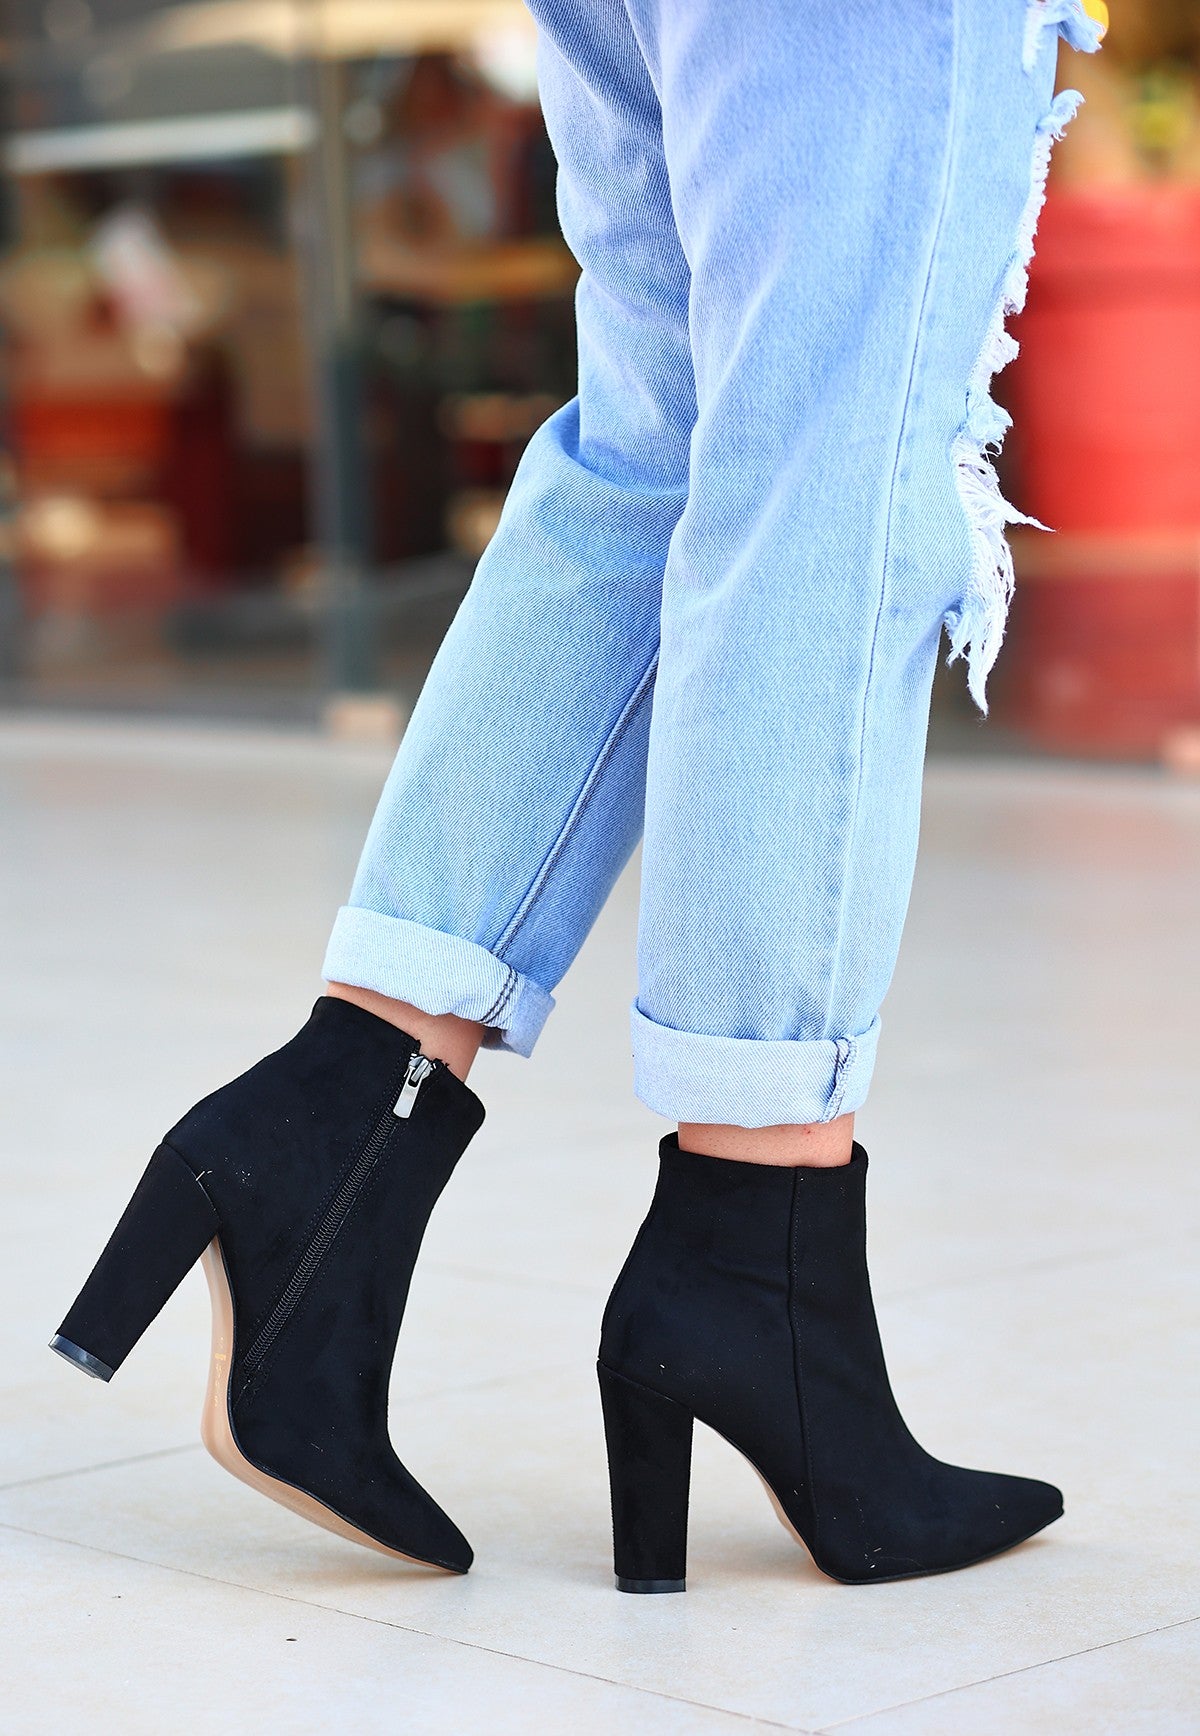 Women's Black Suede Heeled Boots - STREETMODE™